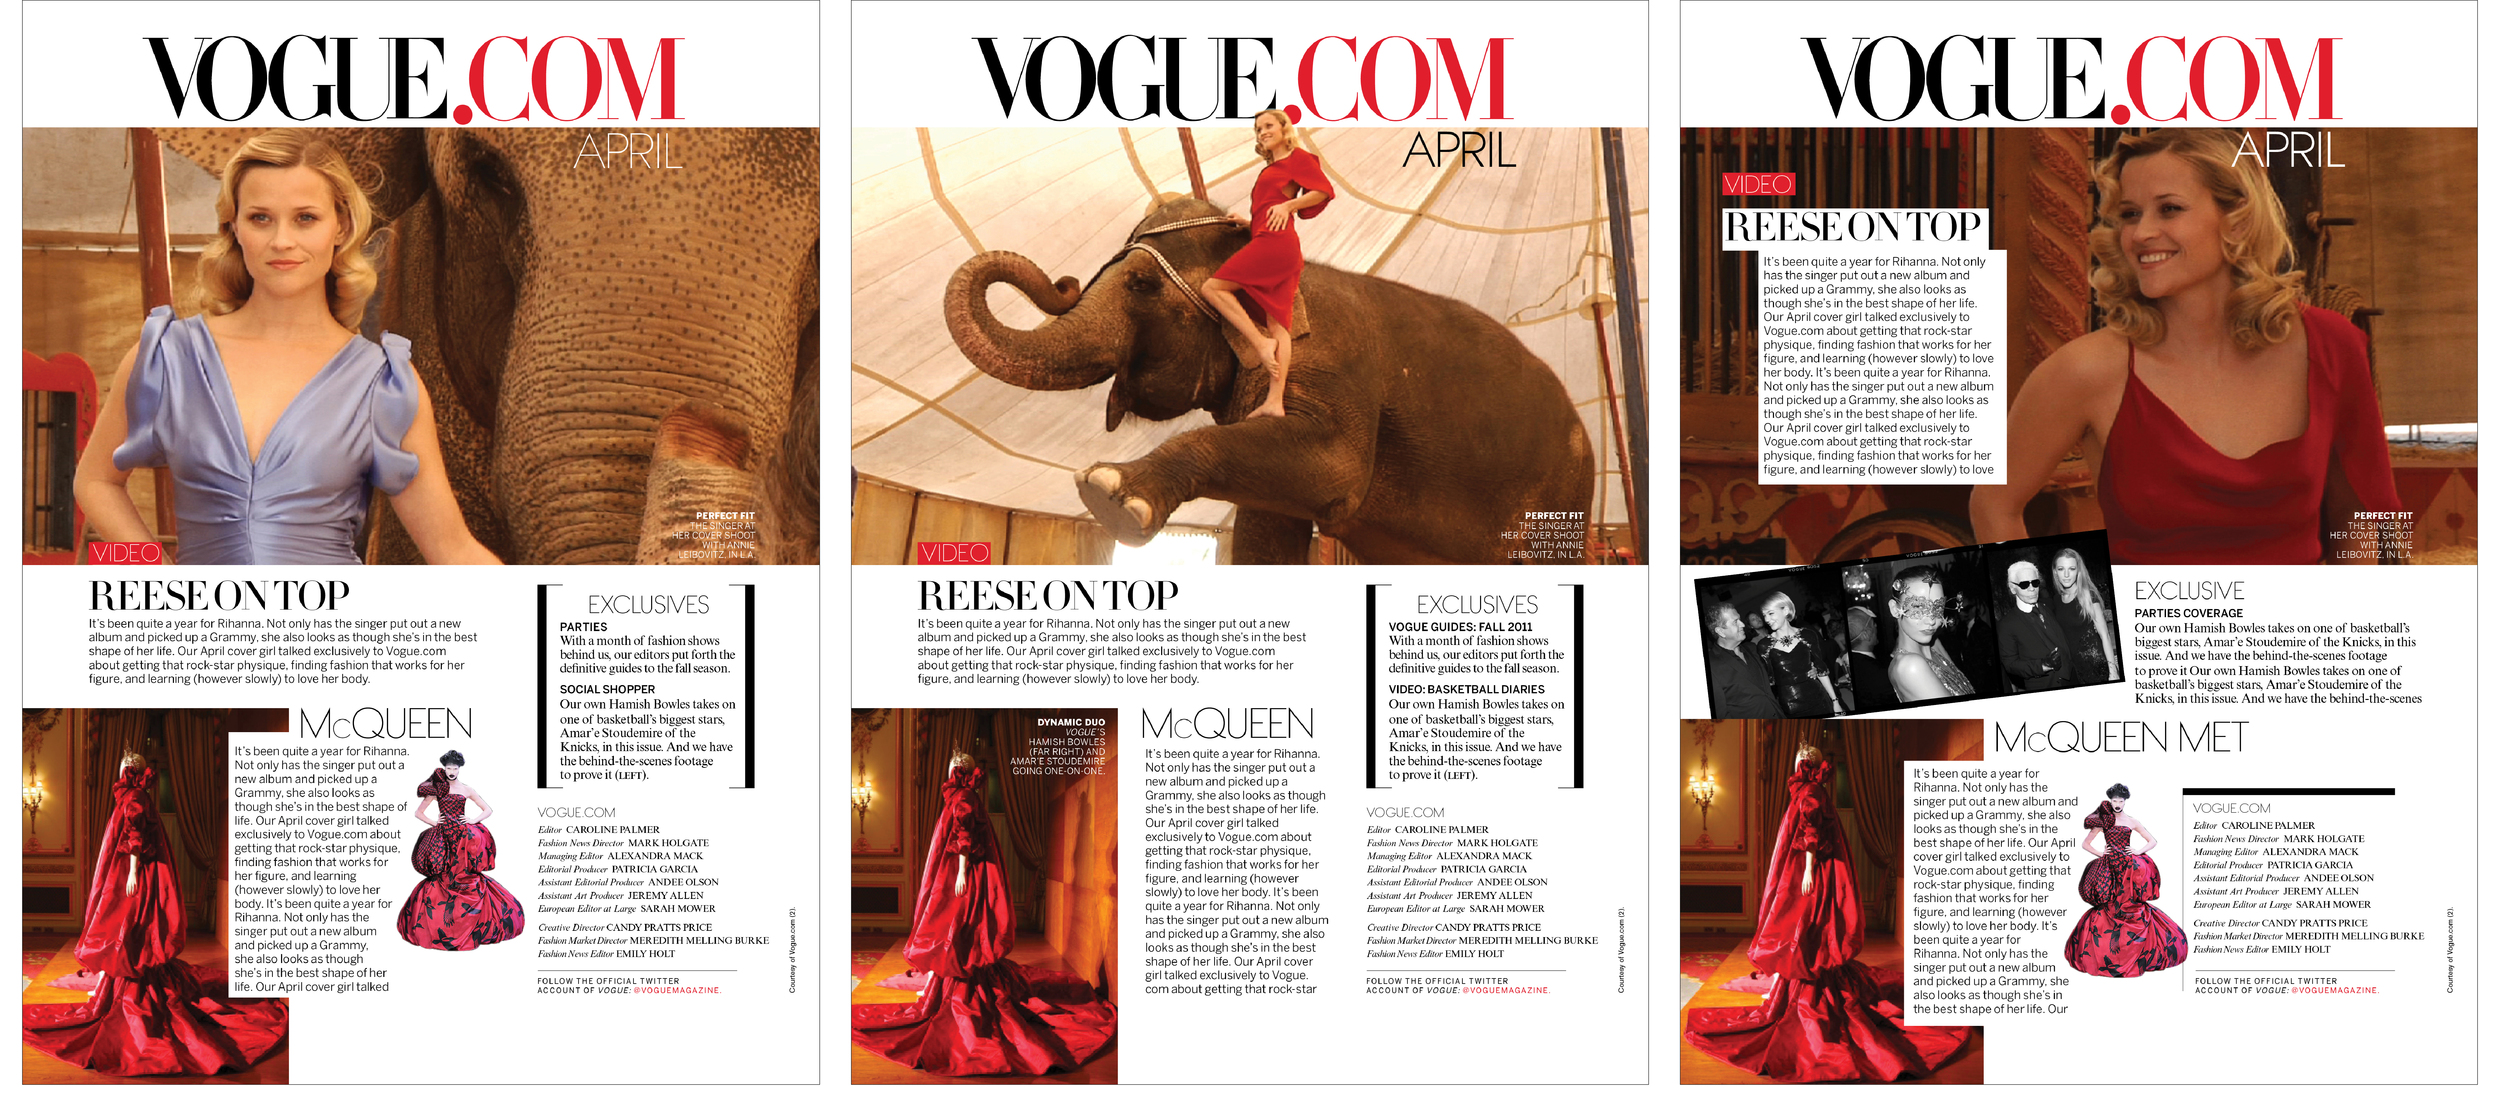  Vogue.com TOC Page&nbsp; (Right layout was published)   May 2011  Vogue Magazine&nbsp; 